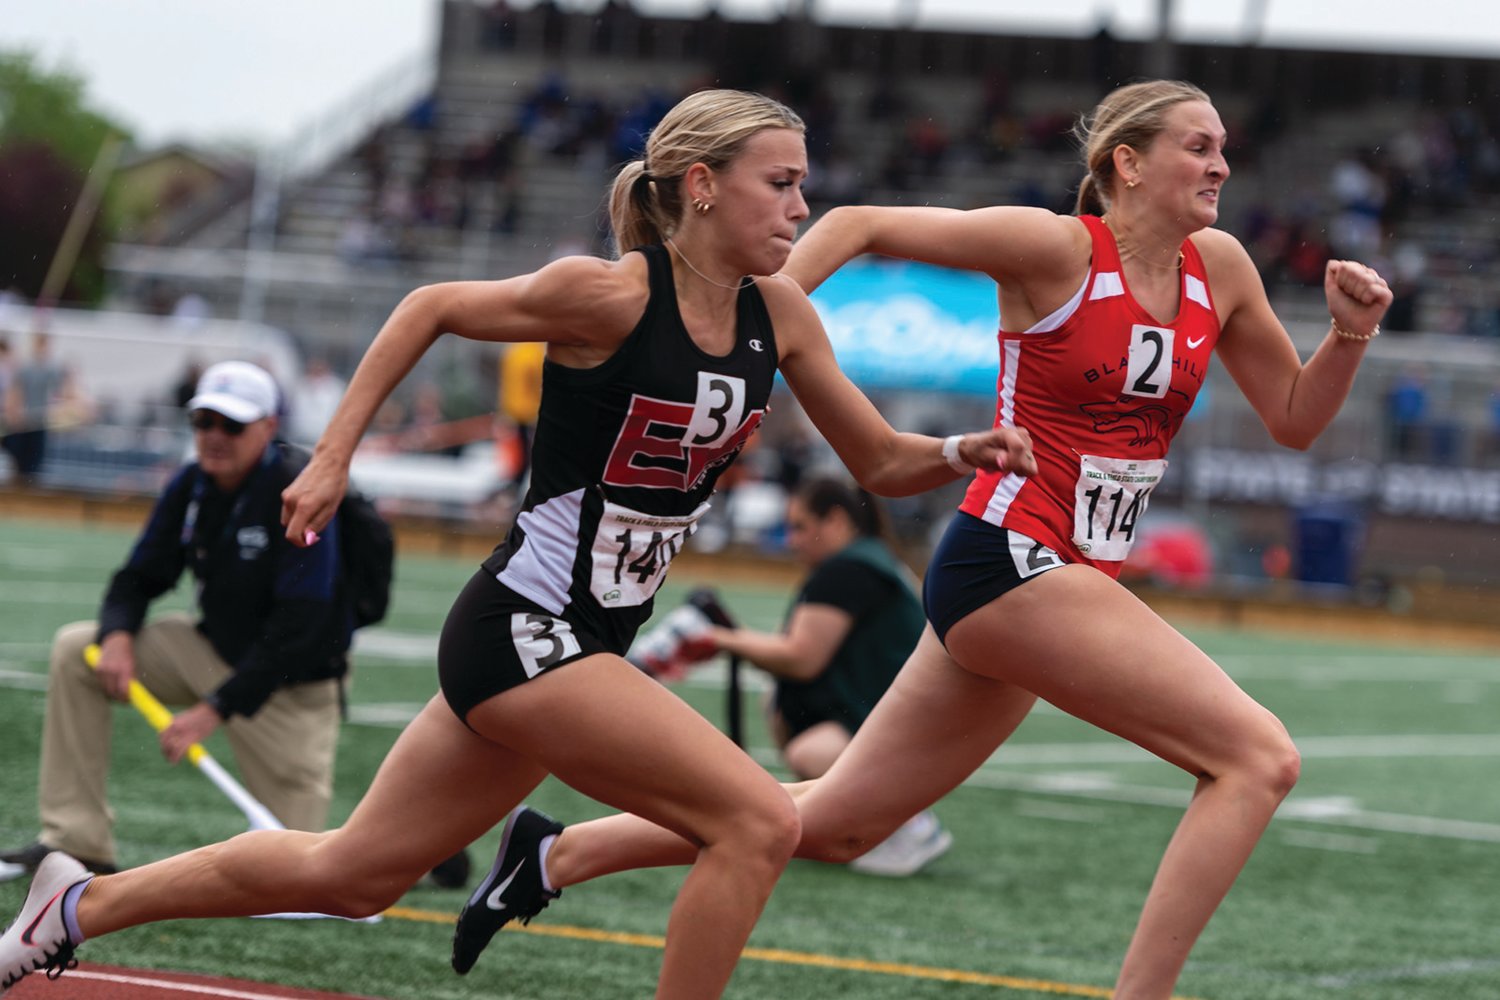 East Valley's Allison Bryan and Black Hills' Olivia Hisaw stretch to the finish line in a 2A Girls 100 Hurdles prelim at the 2A/3A/4A State Track and Field Championships on Thursday, May 26, 2022, at Mount Tahoma High School in Tacoma. (Joshua Hart/For The Chronicle)